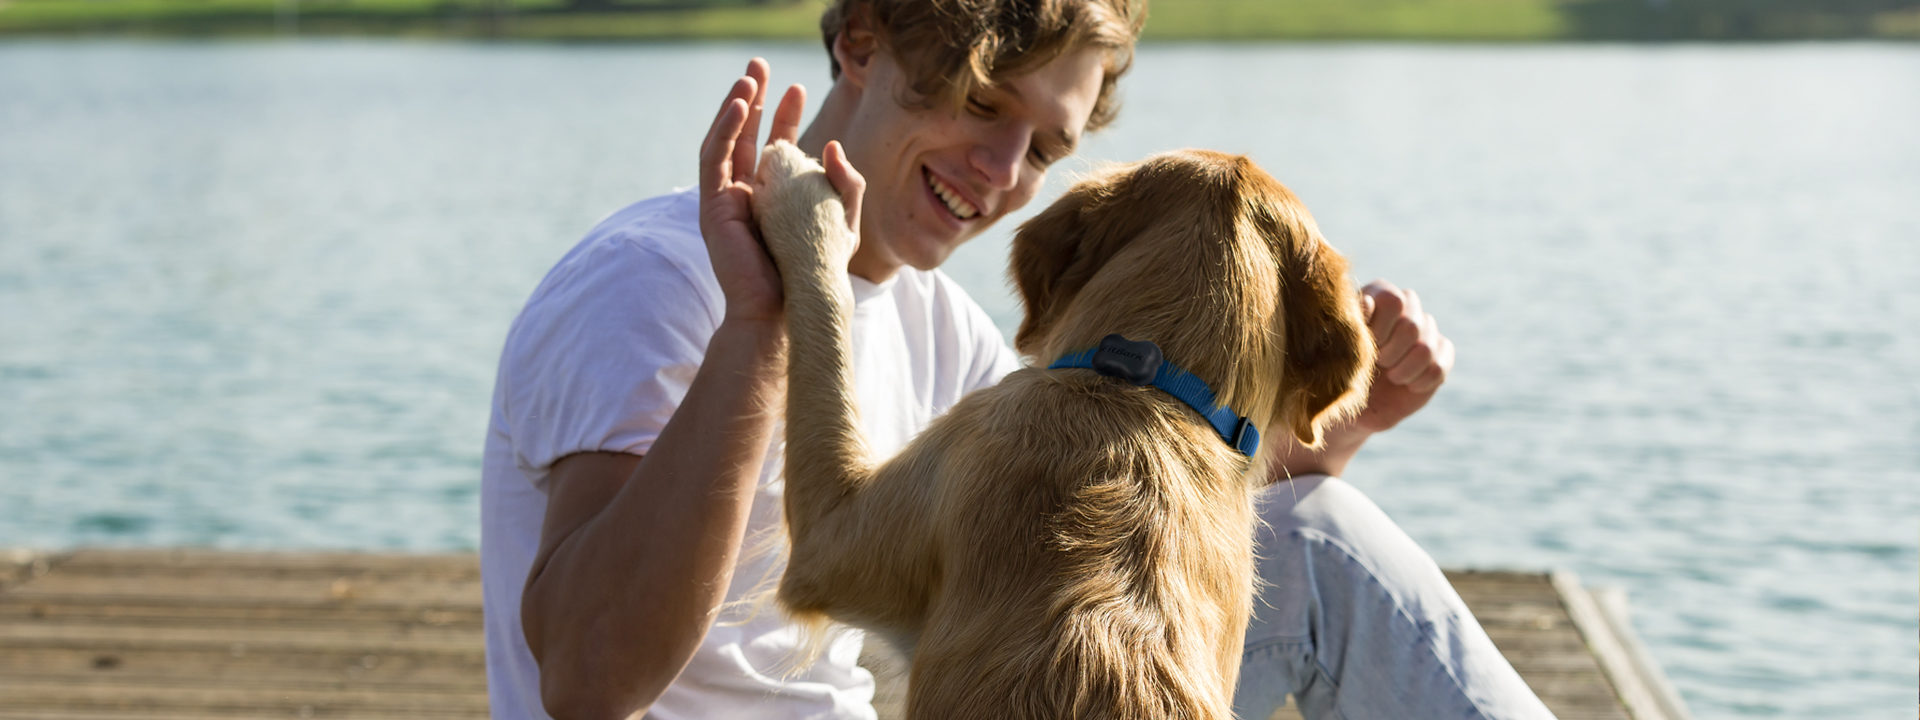 The 6 Best Dog Fitbits and Activity Trackers for Your Pup's Health